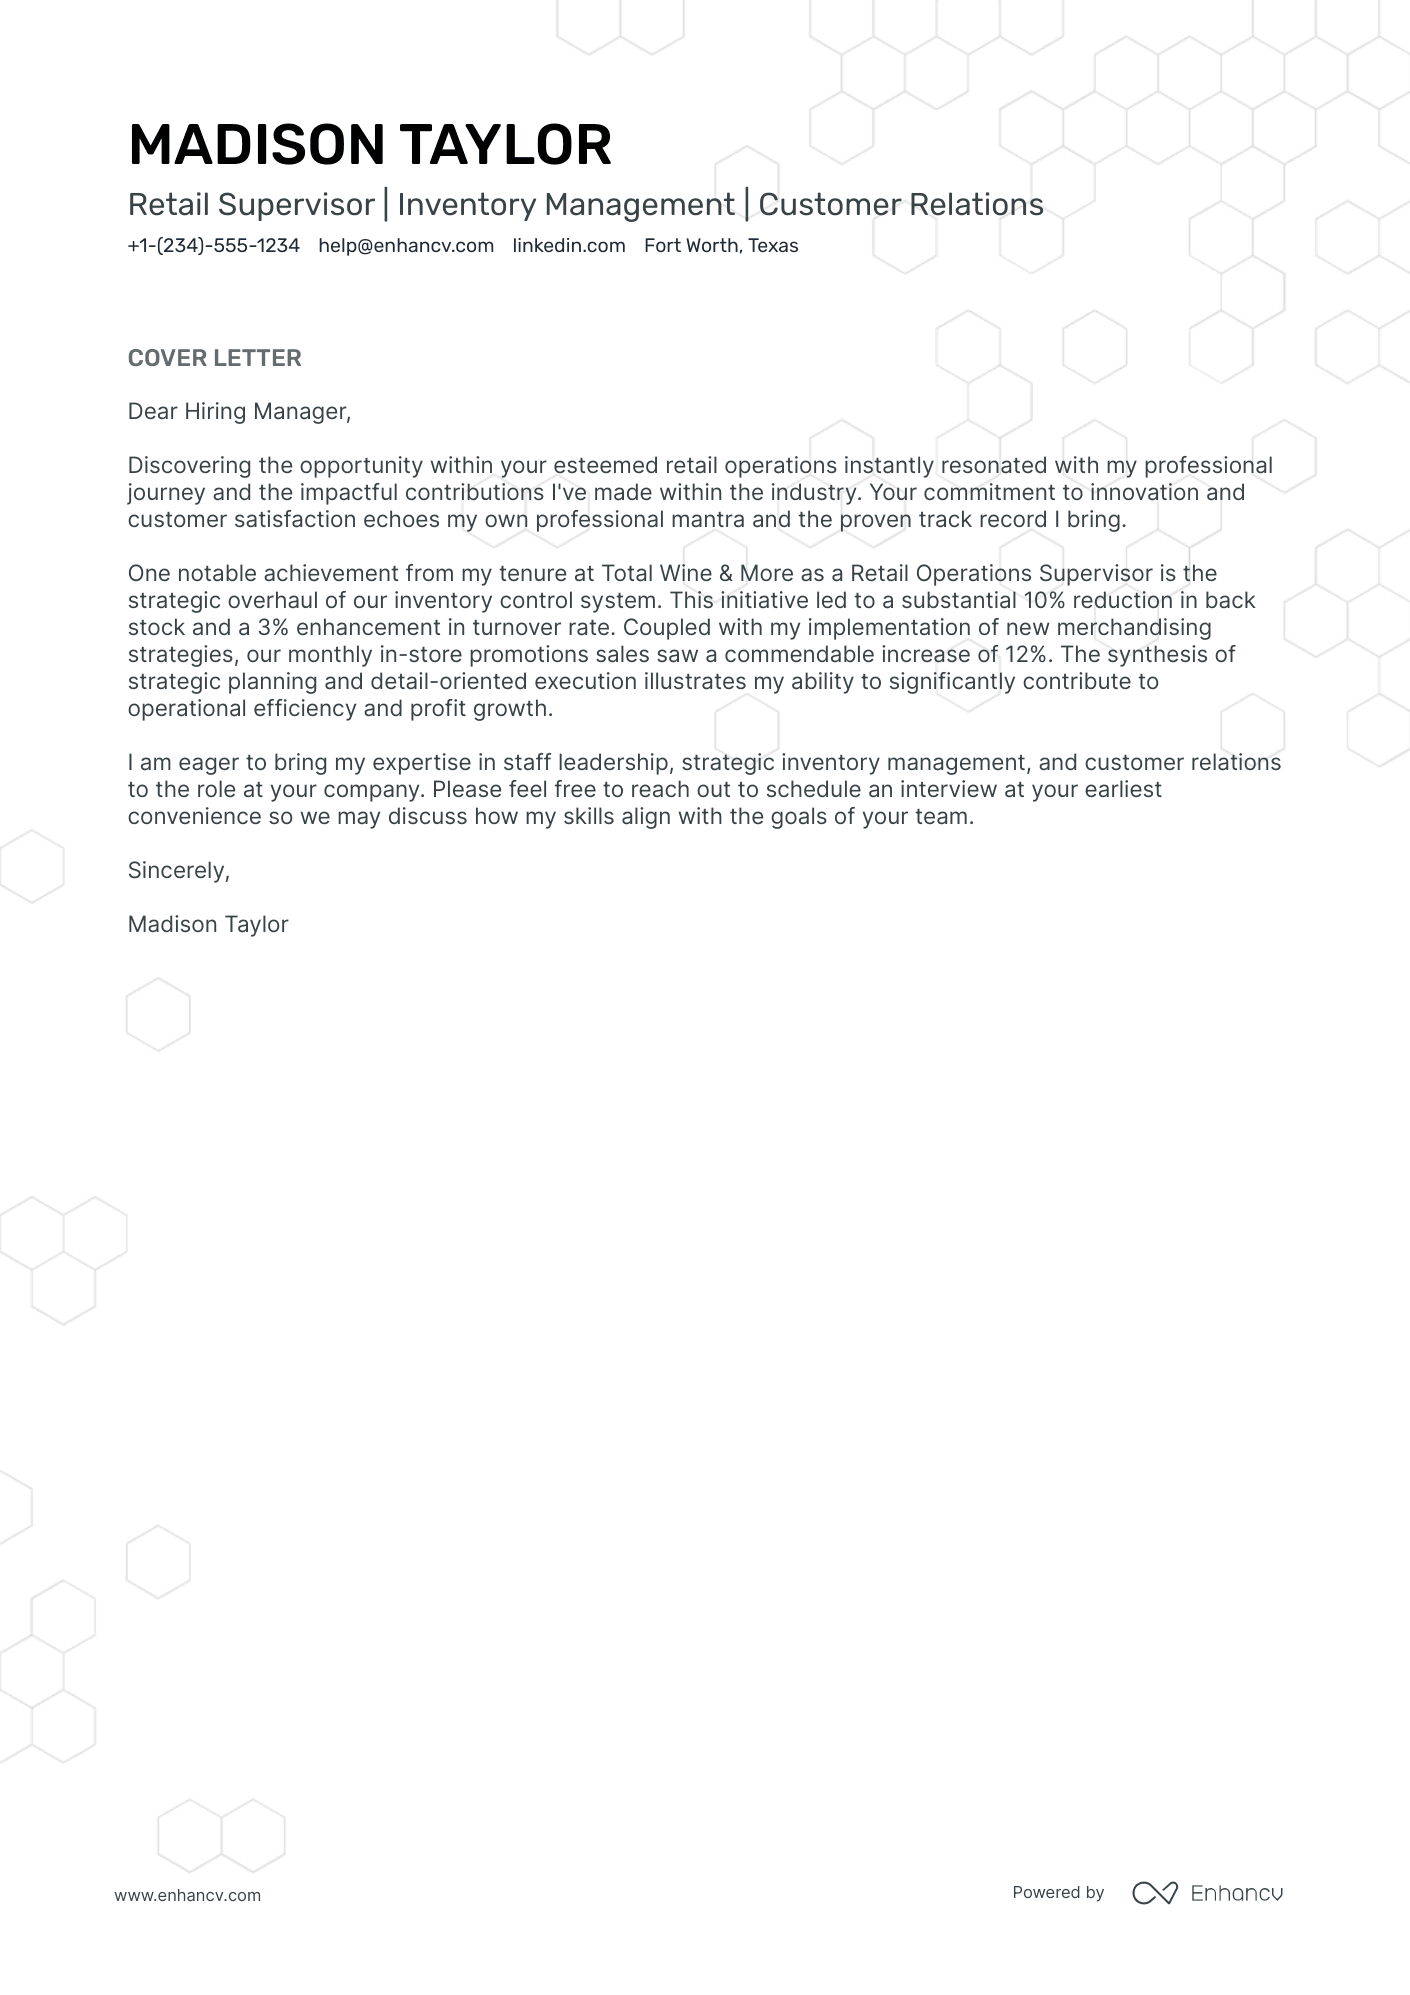 sample application letter as store manager